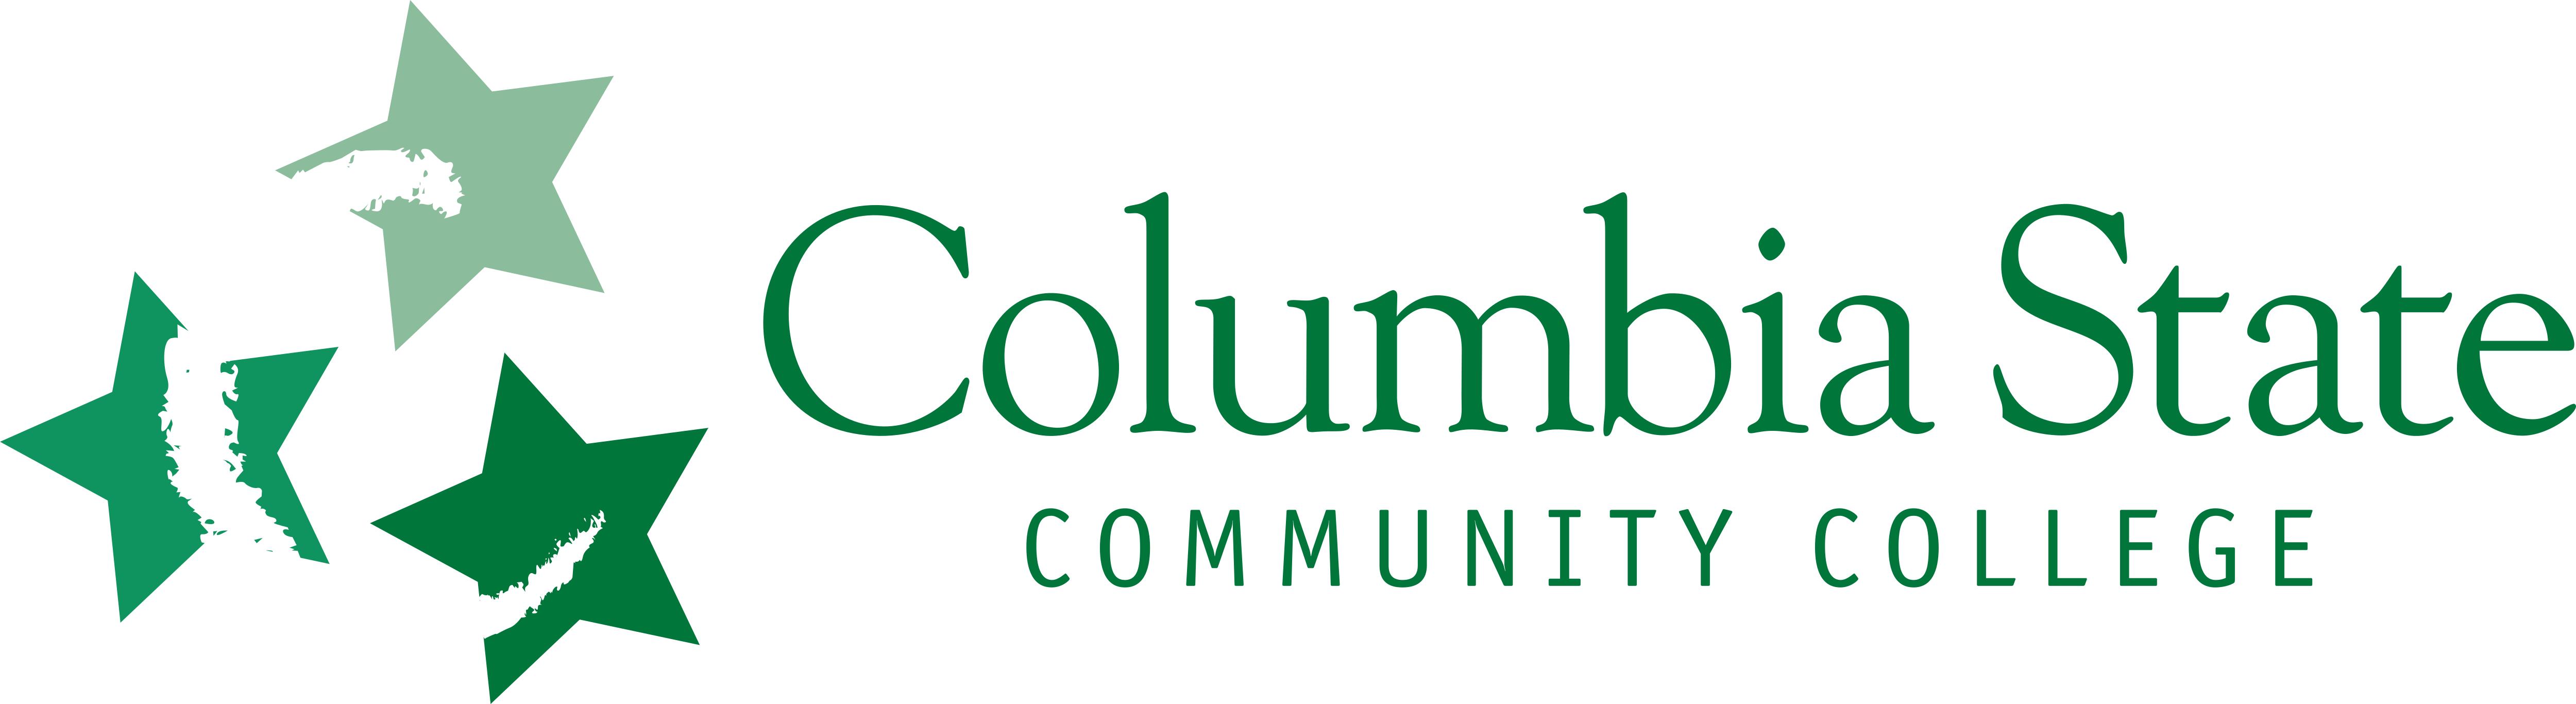 Columbia State Community College Logos Download